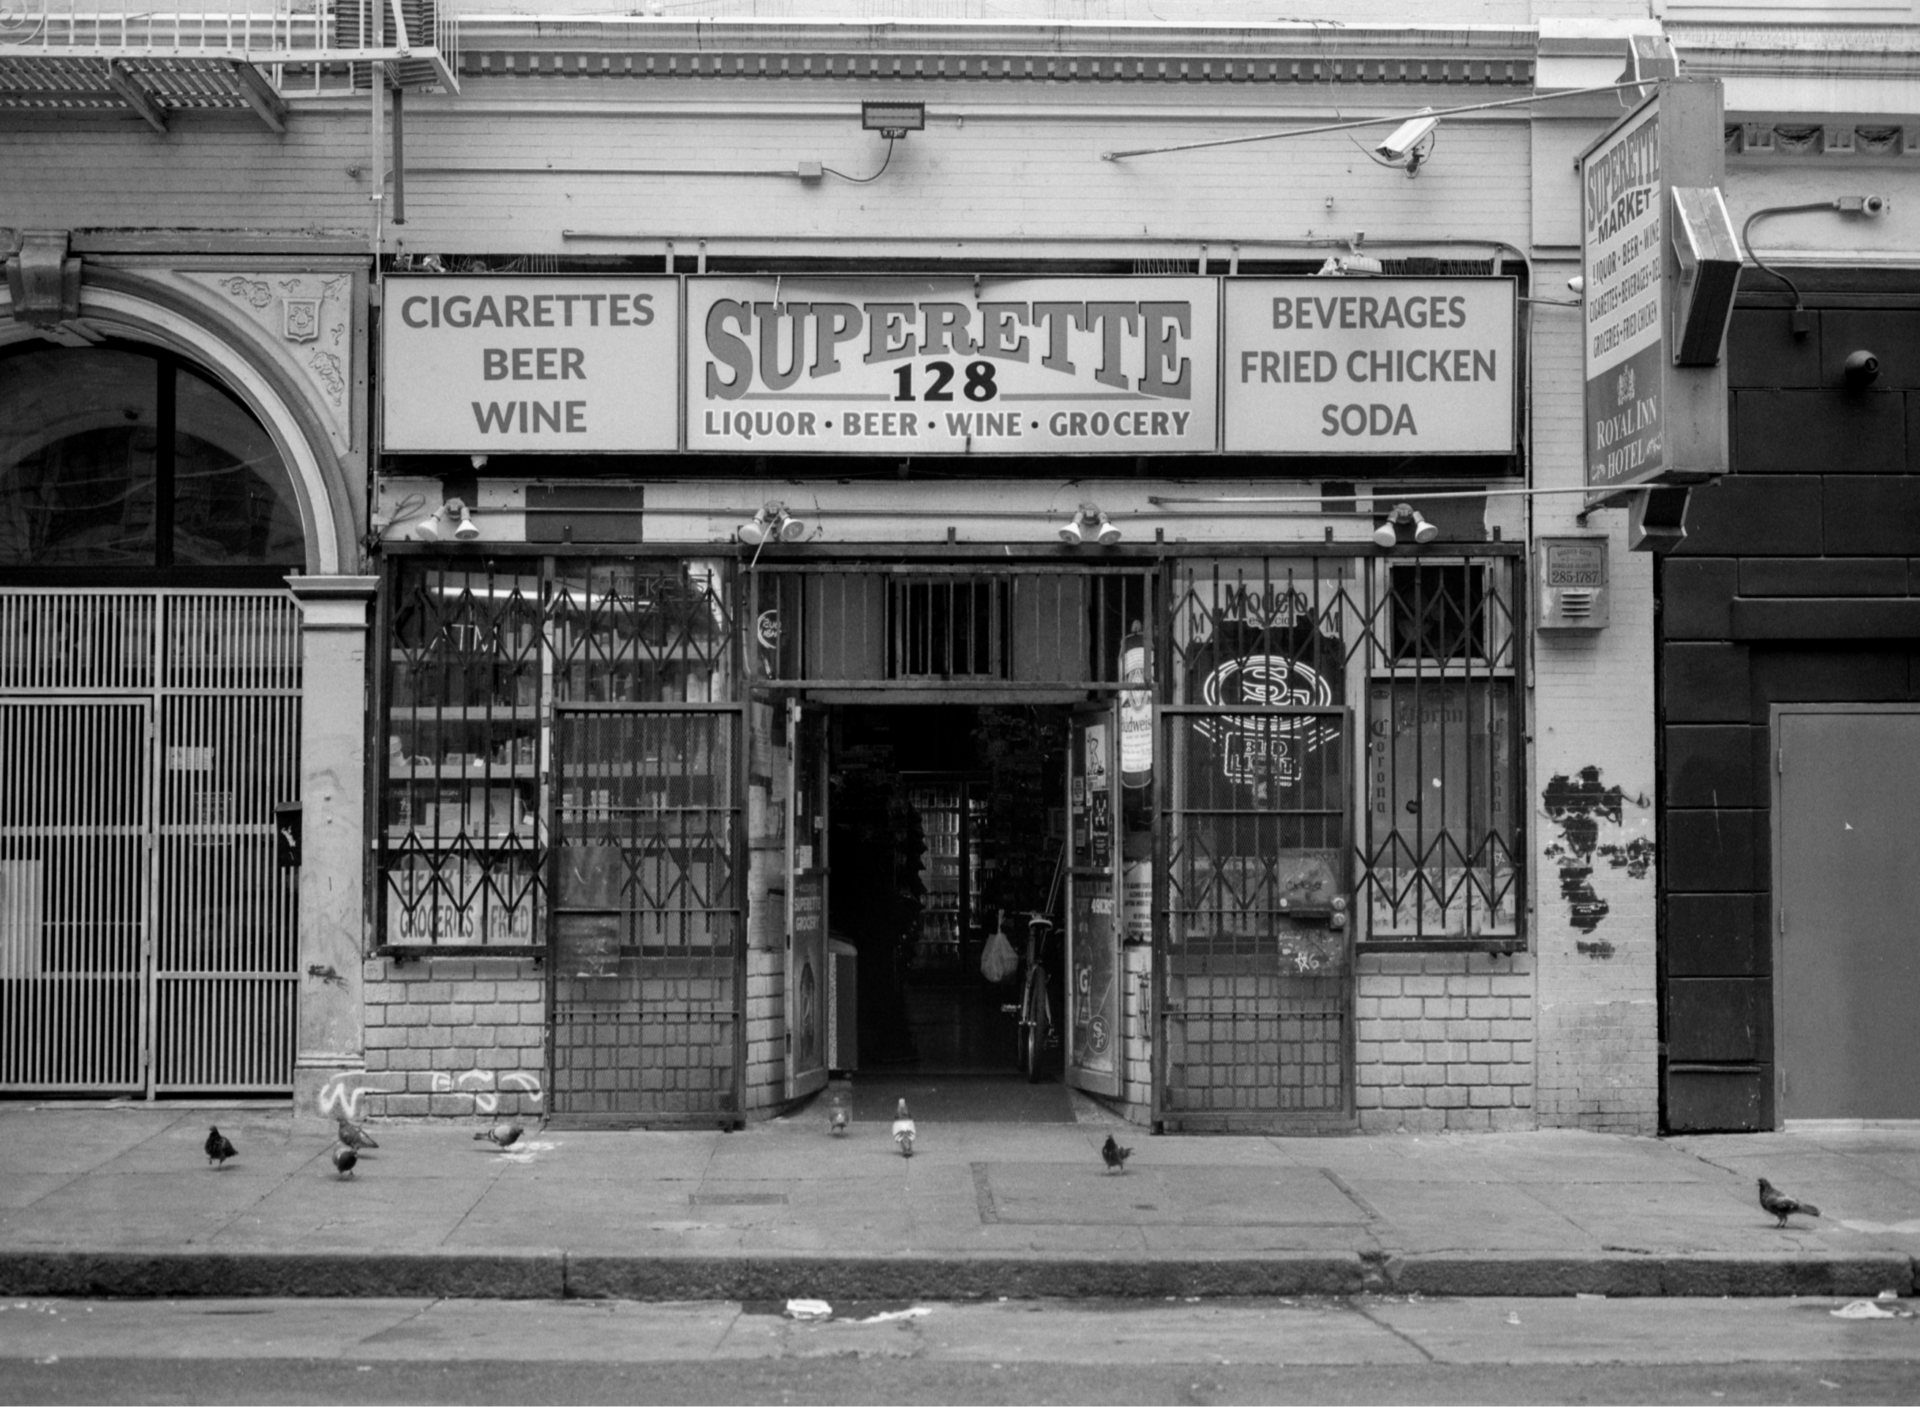 A black and white photograph of the Superette storefront in San Francisco